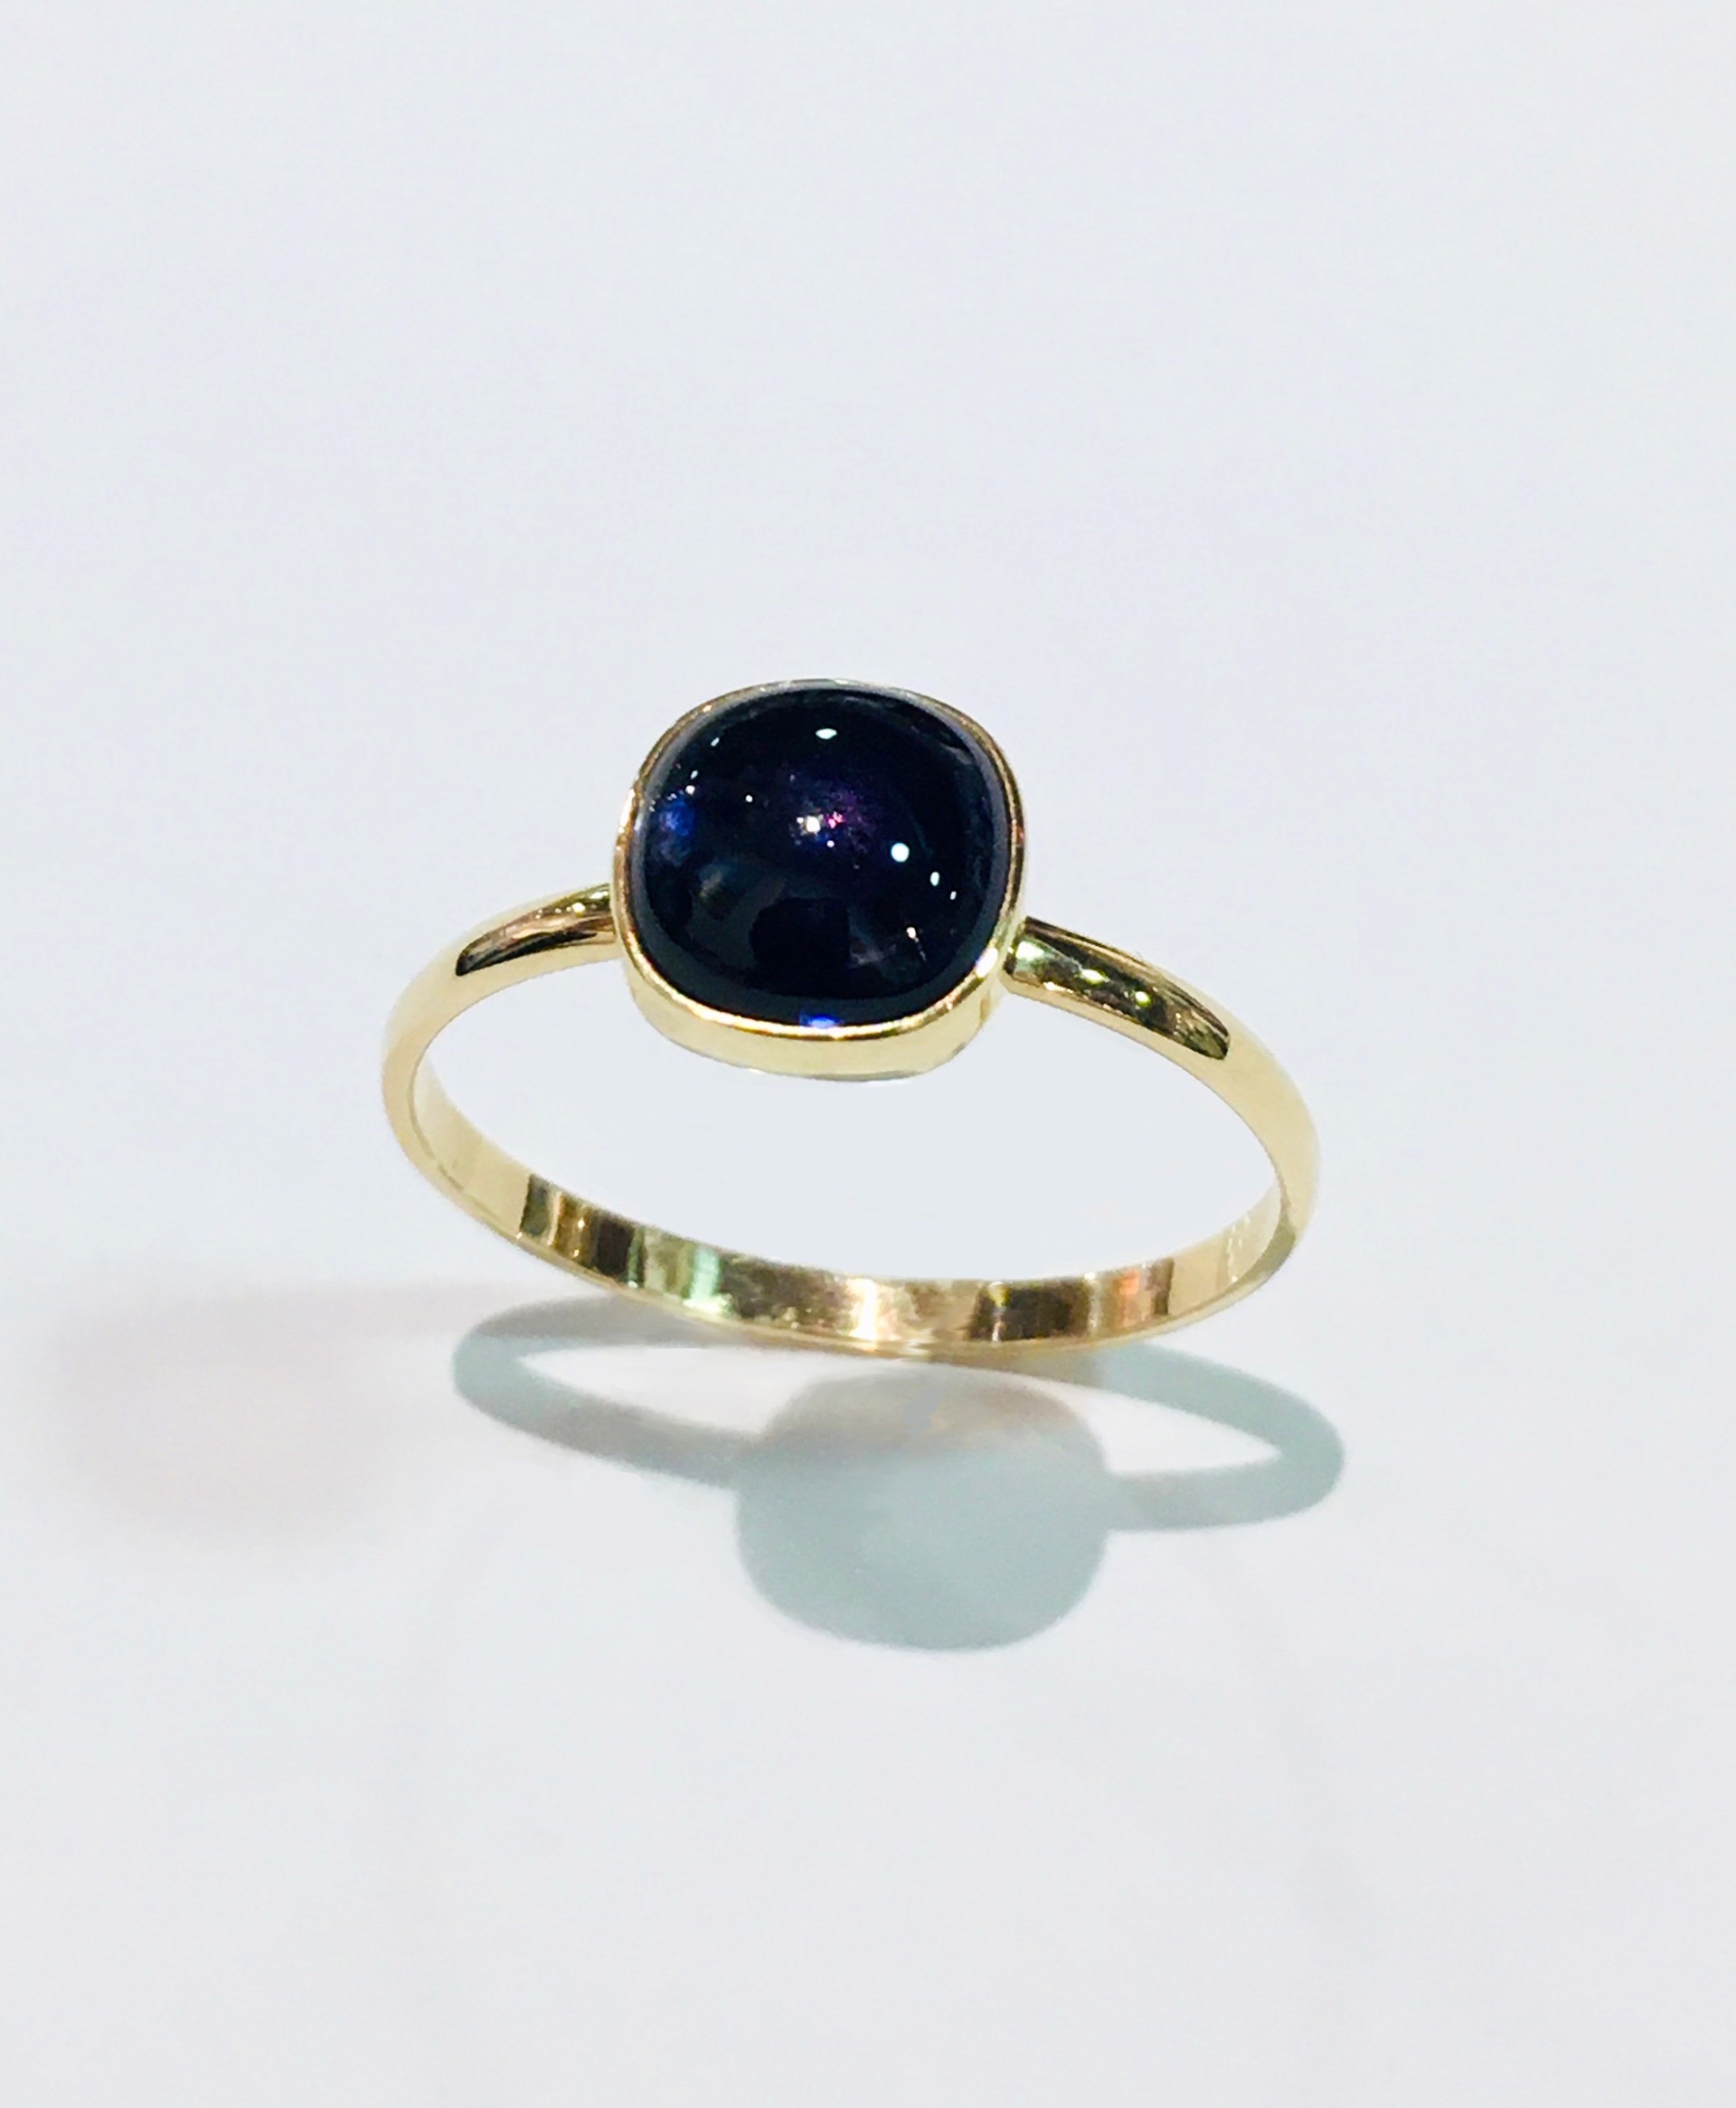 Iolite Ring by D'ETTE DELFORGE